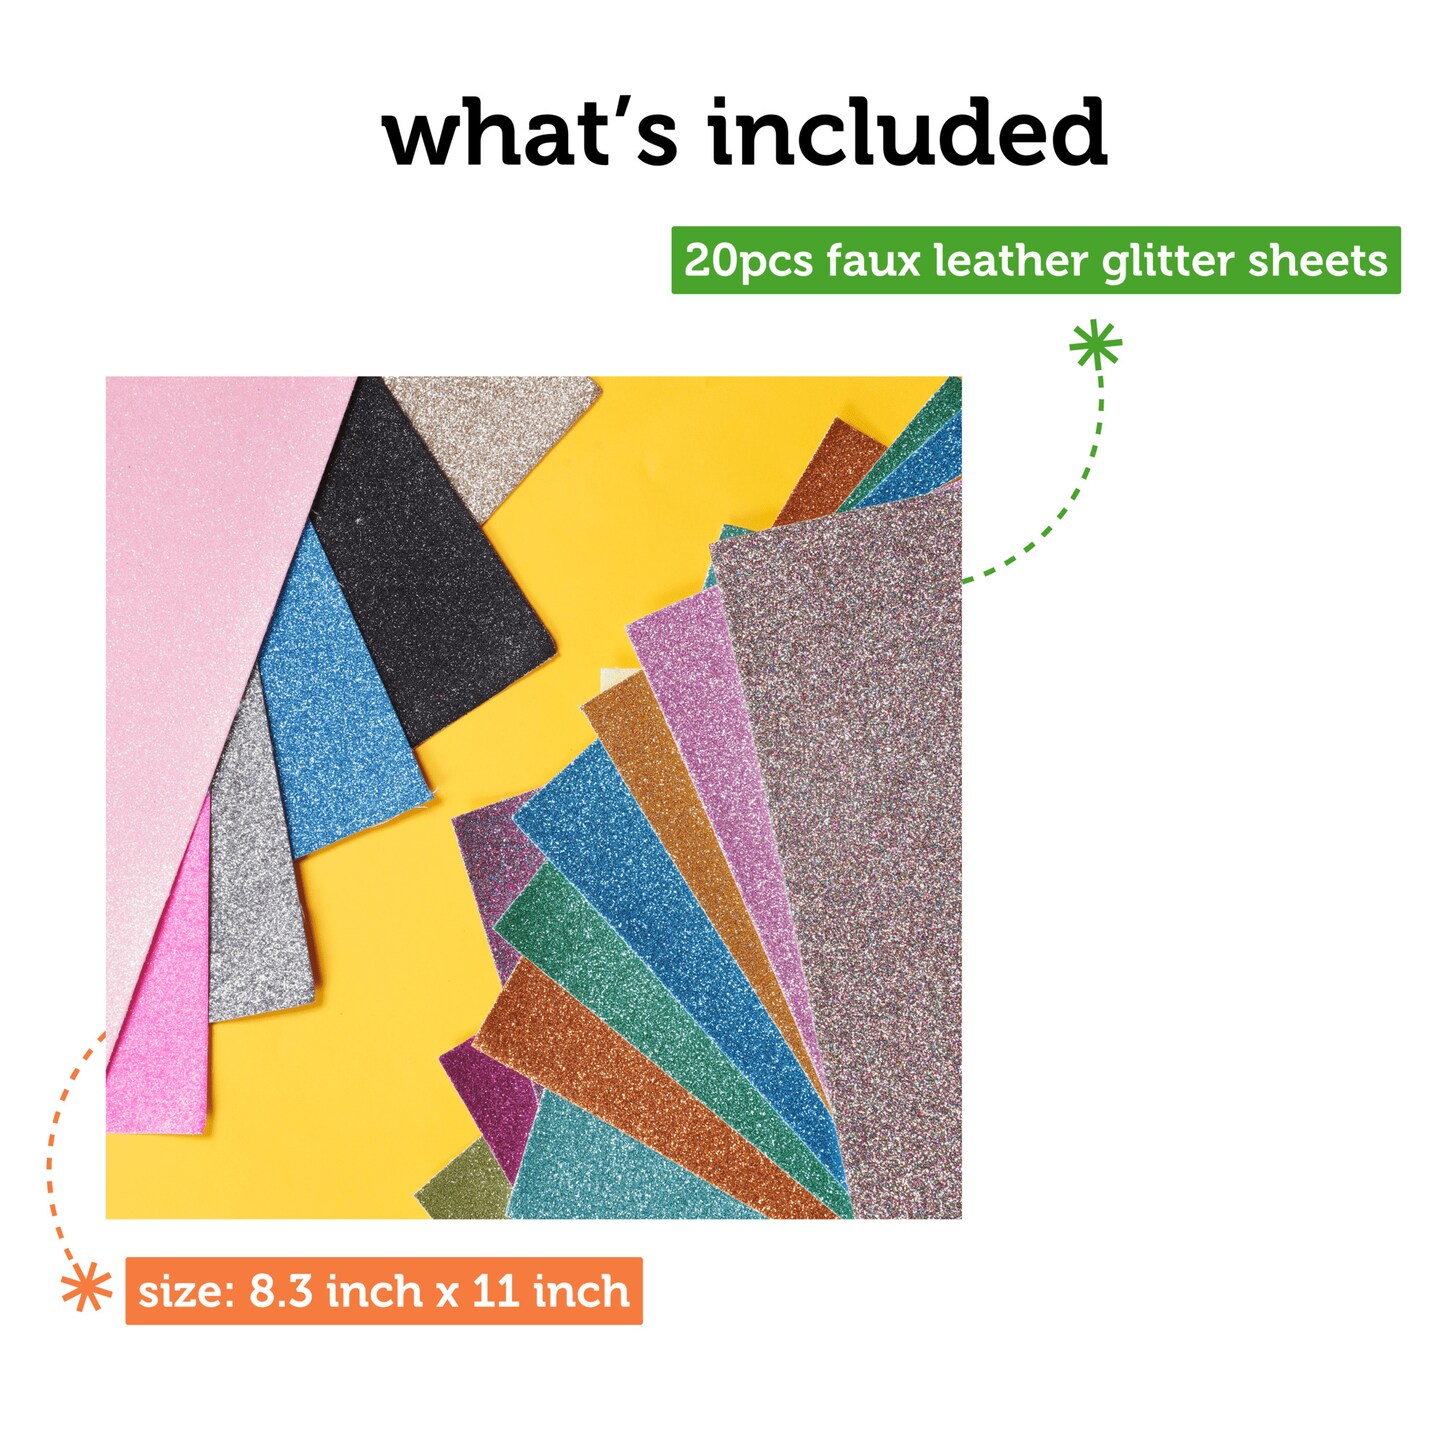 Incraftables Glitter Faux Leather Sheets for Crafts 20 Pieces. Assorted  Faux Leather Sheets for Cricut (8.3”x11”). Best Fauxs Leather Sheets for  Earrings & Arts. PU Leather Fabric for Adults & Kids